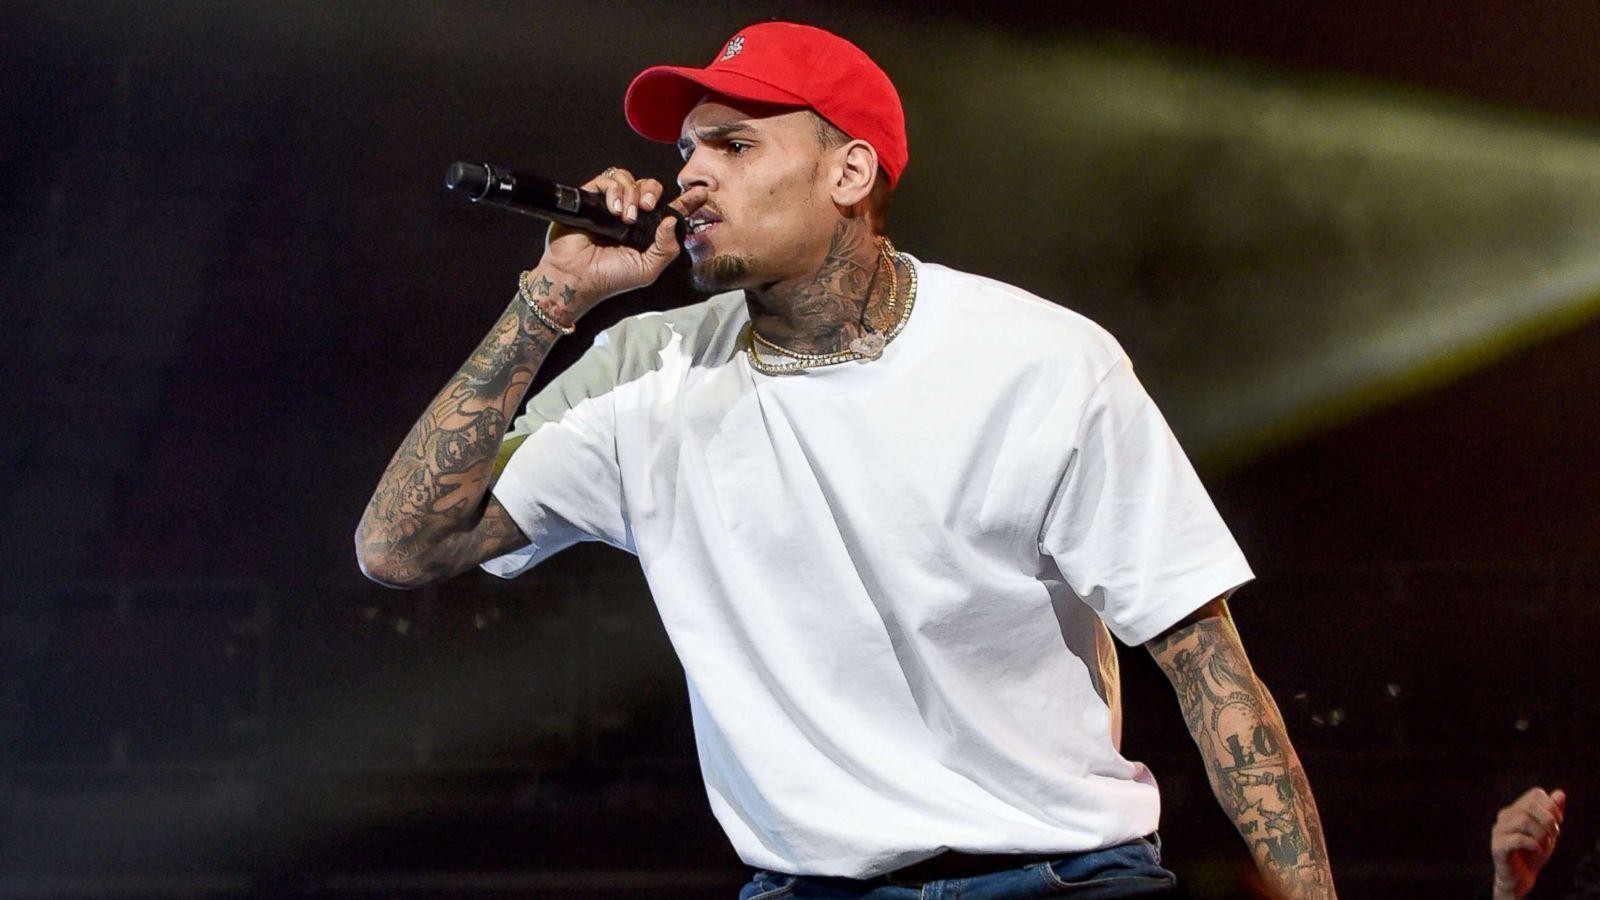 Chris Brown suing alleged r victim for defamation